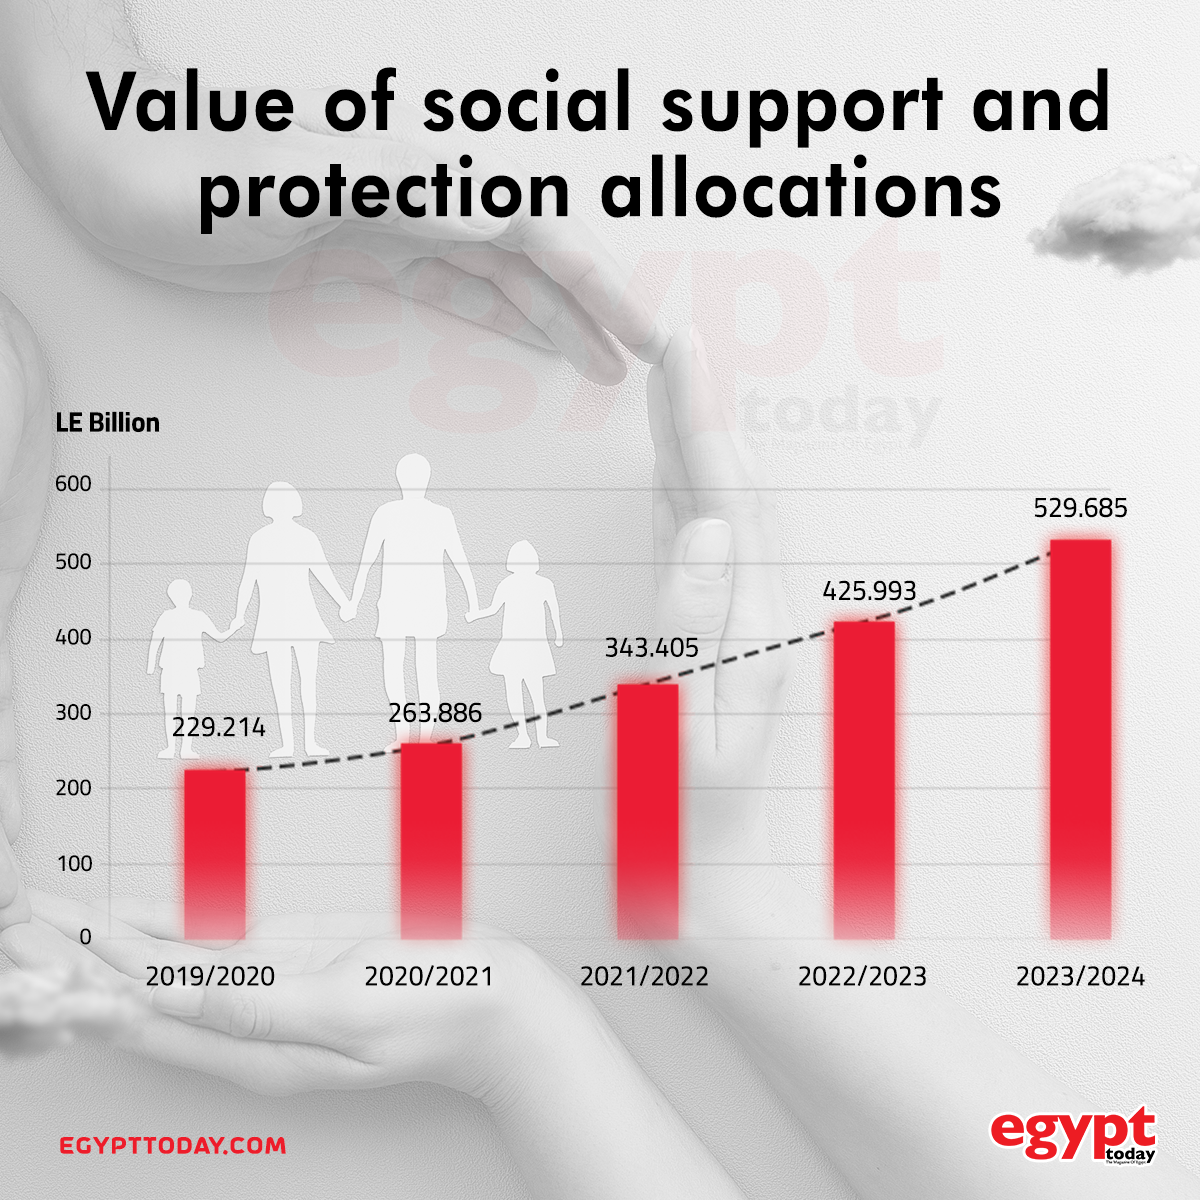 Value of social support and protection allocations